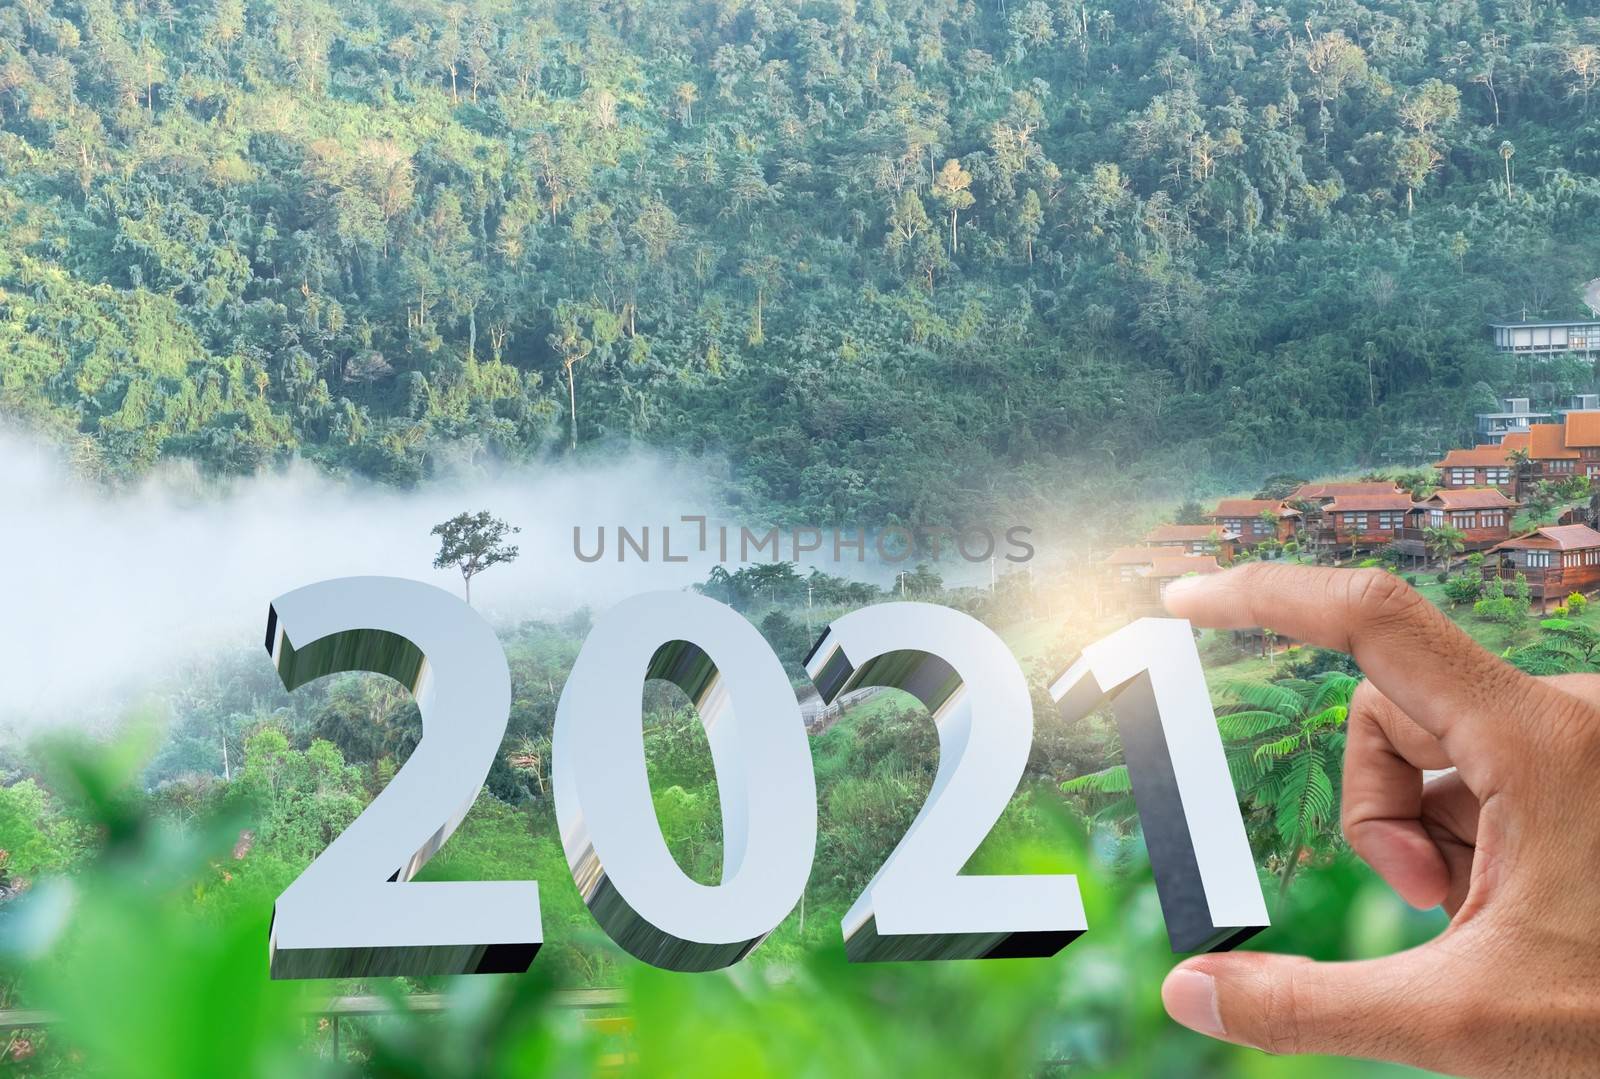 People man hand holding numbers 2021 Metaphor In the new year 2021 festival With scenic scenery In the forest Mountain and fog of Khao Kho Phetchabun Thailand Count down change 2020 to 2021 year